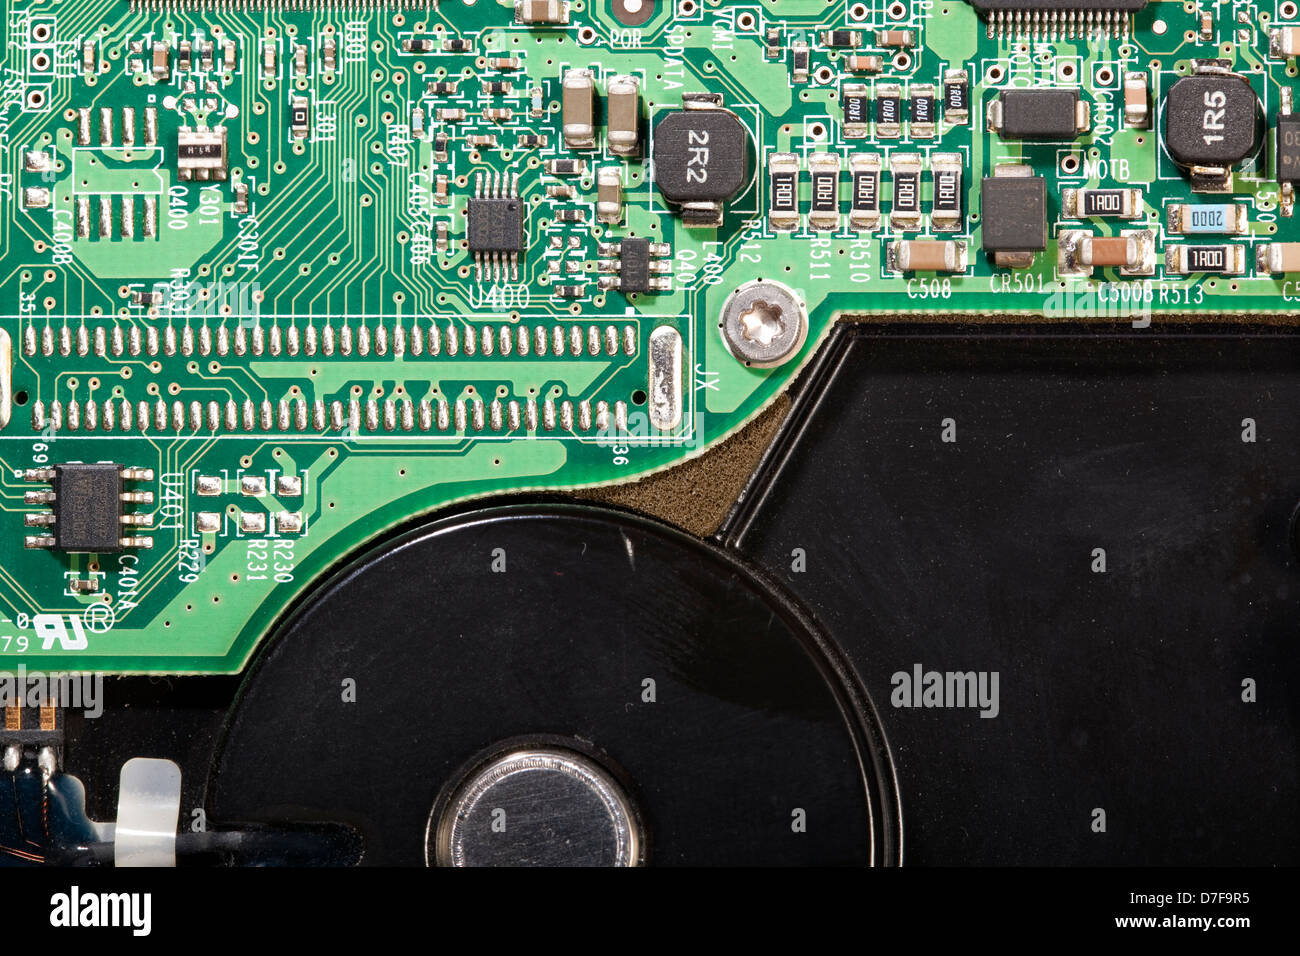 The exterior electronics of a hard drive. Stock Photo